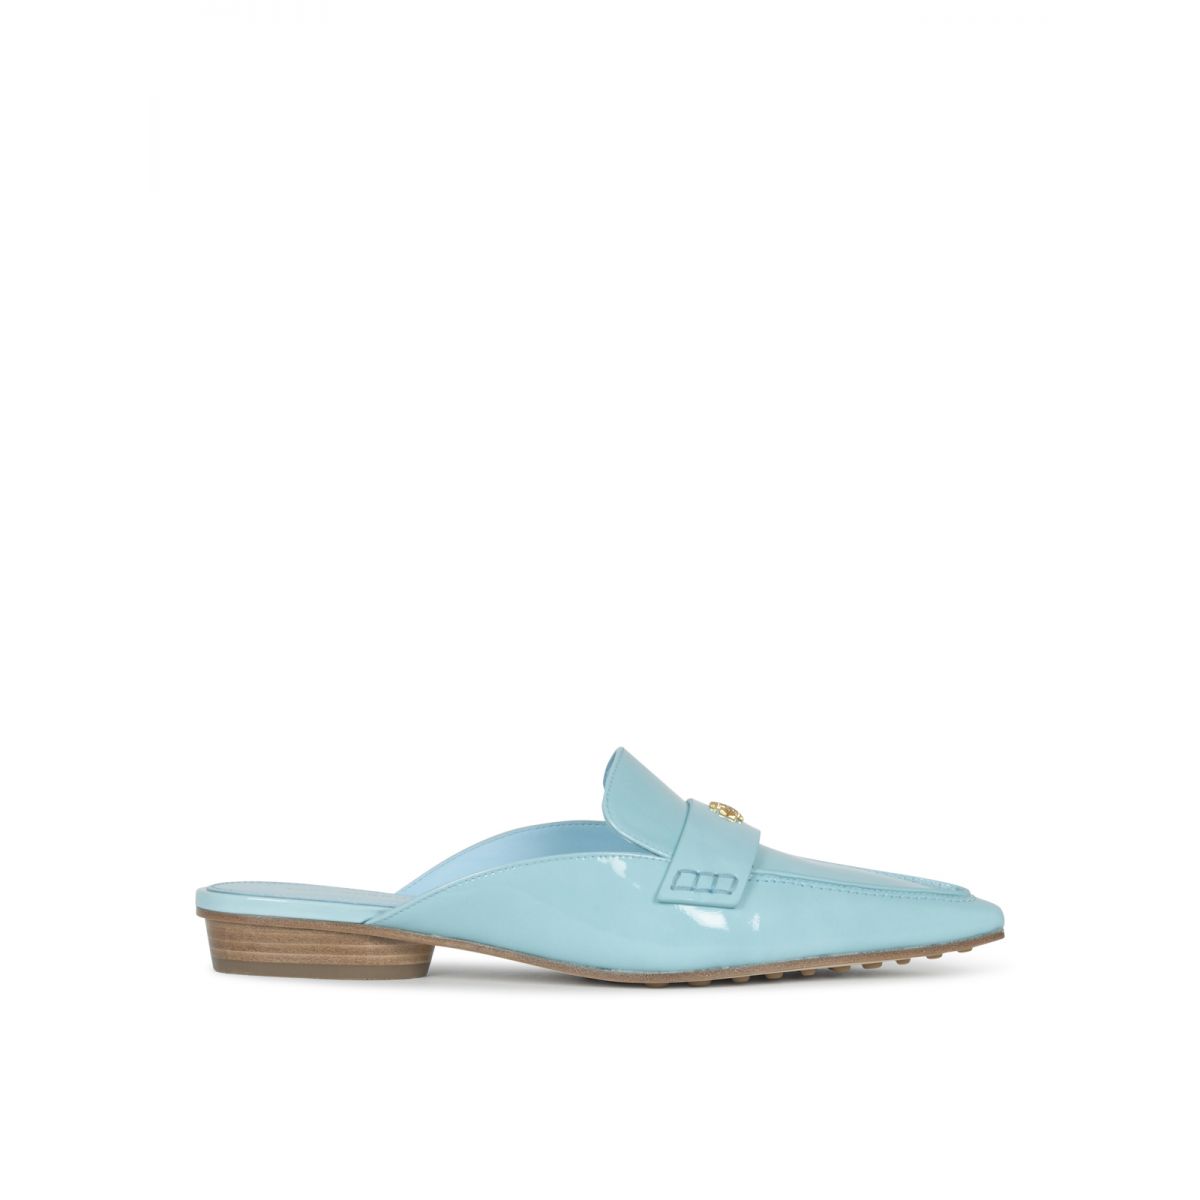 TORY BURCH - Pointed backless loafer